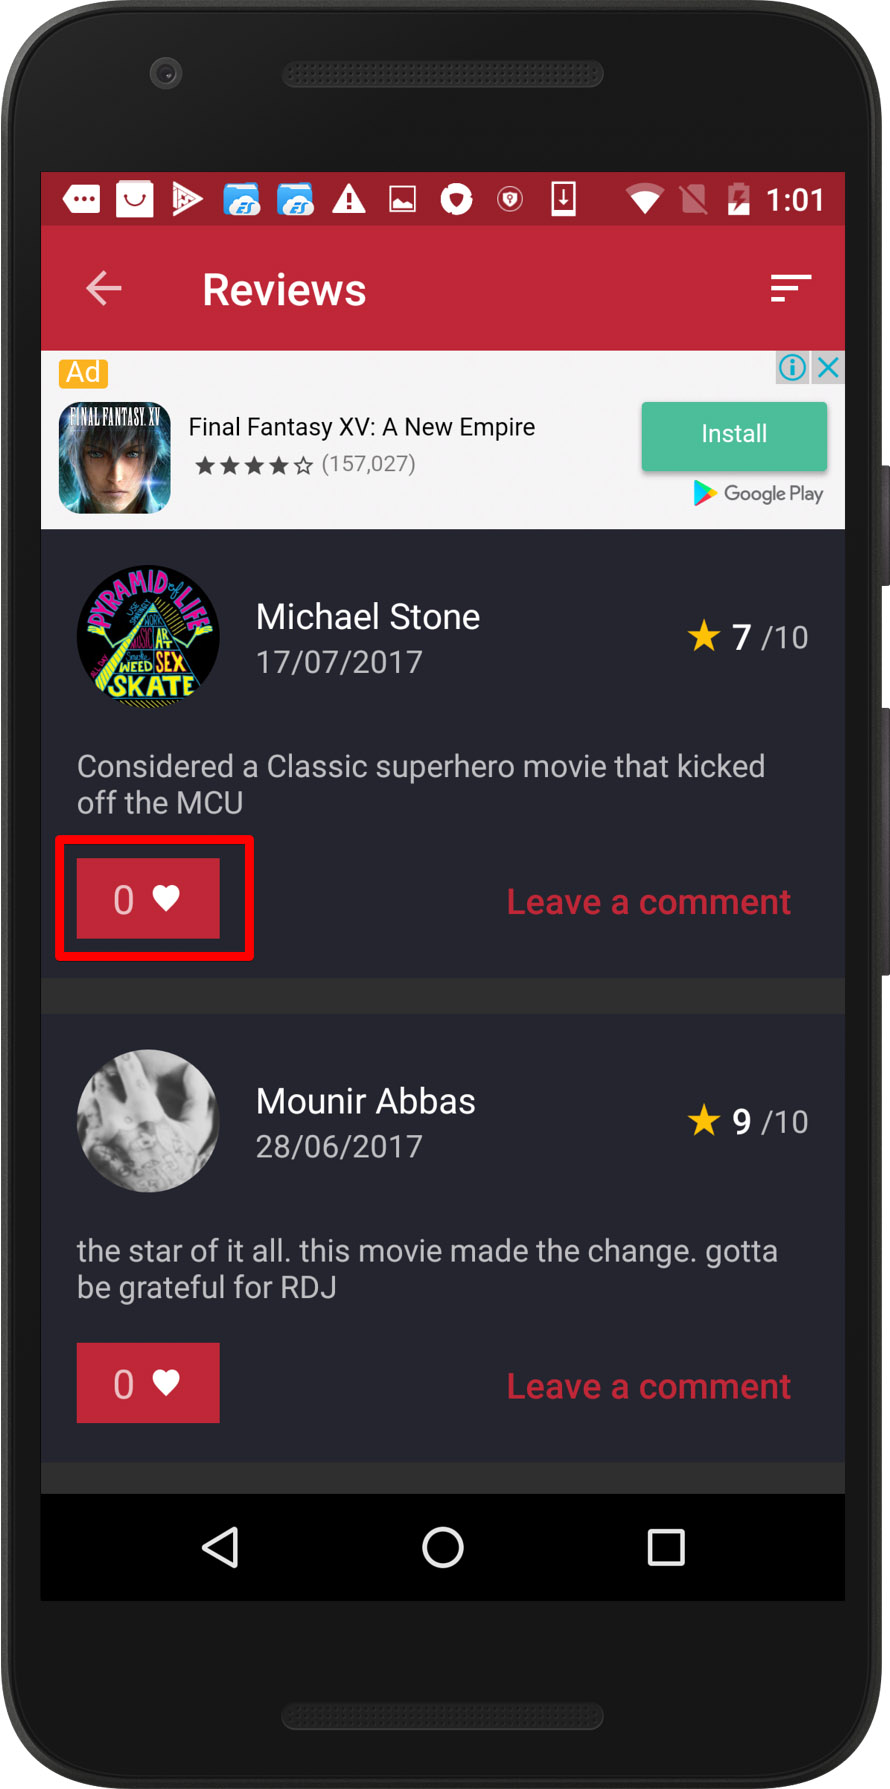 CineTrak app - review can be liked twice, screen 1 / Weekly bug crawl by QAwerk